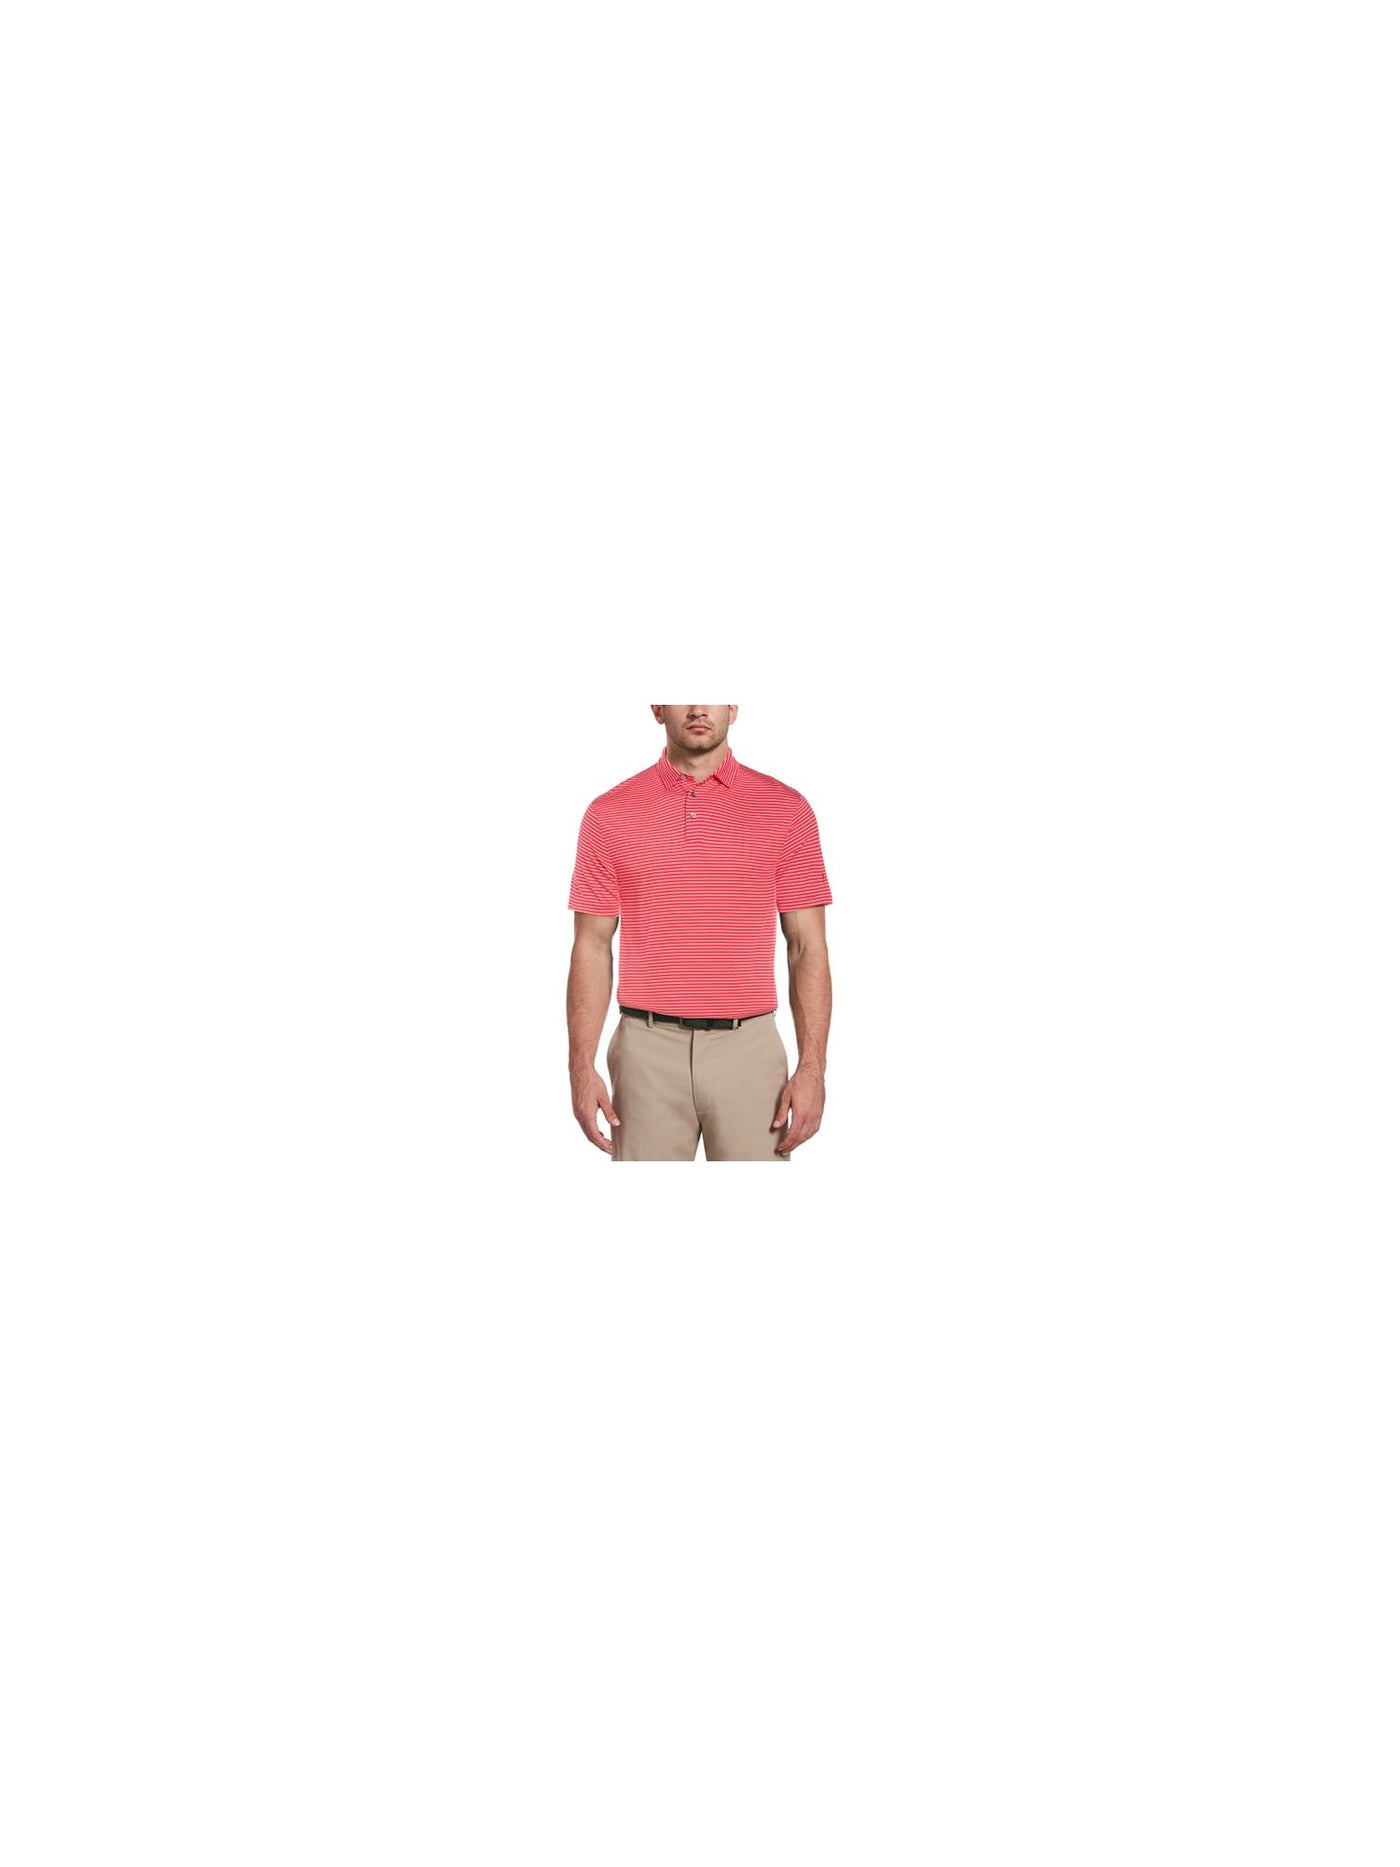 HYBRID APPAREL Mens Pink Lightweight, Striped Athletic Fit Moisture Wicking Polo S